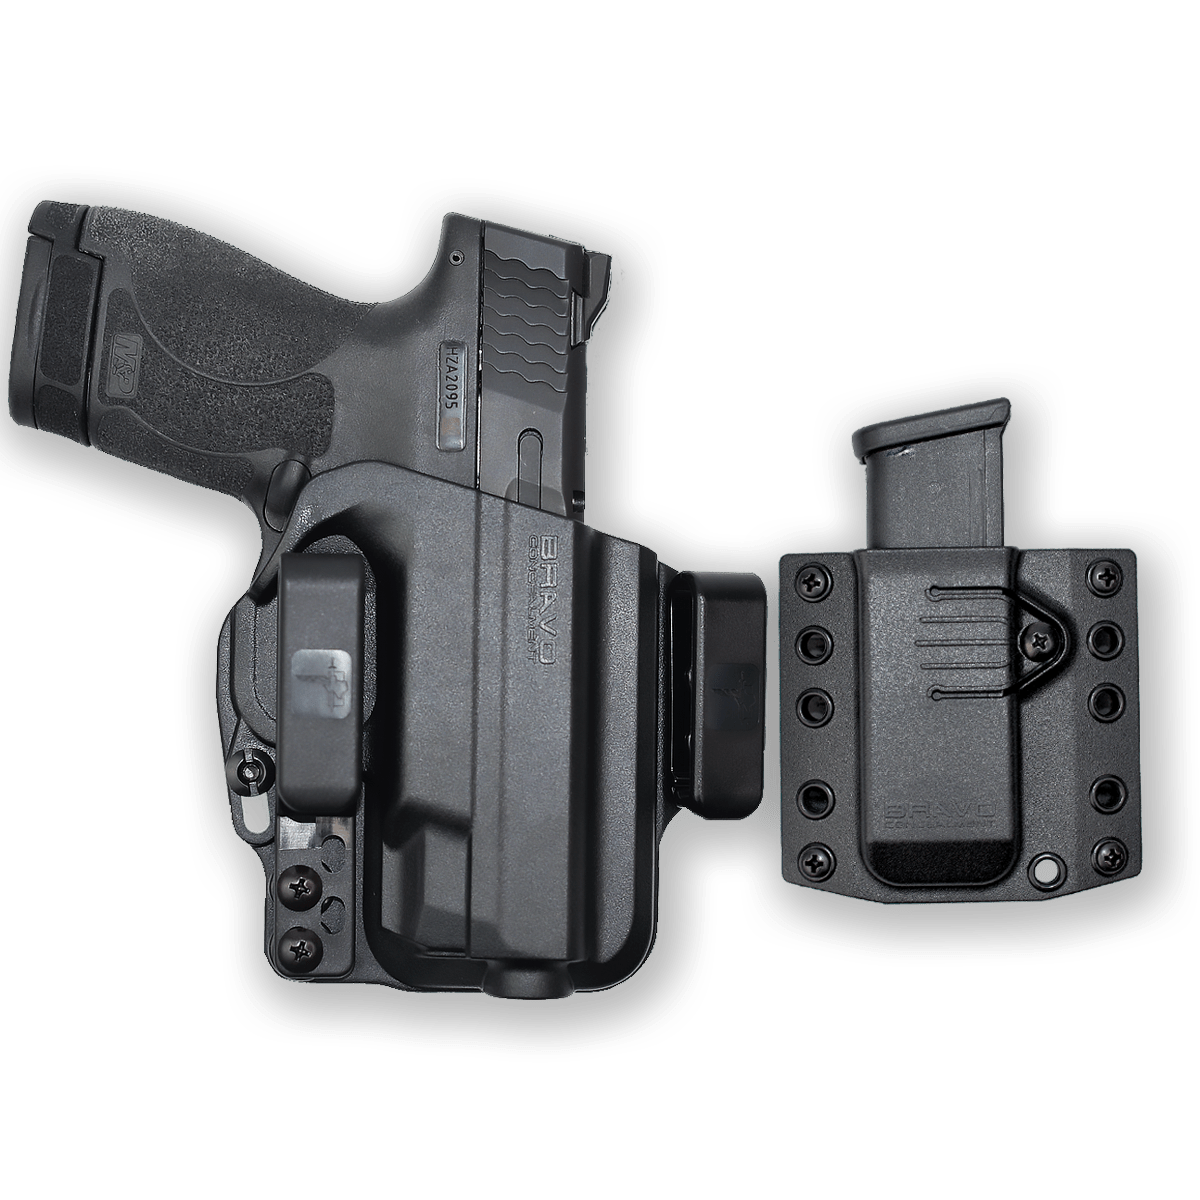 Smith & Wesson Shield Your Pocket Rebate - MidwayUSA